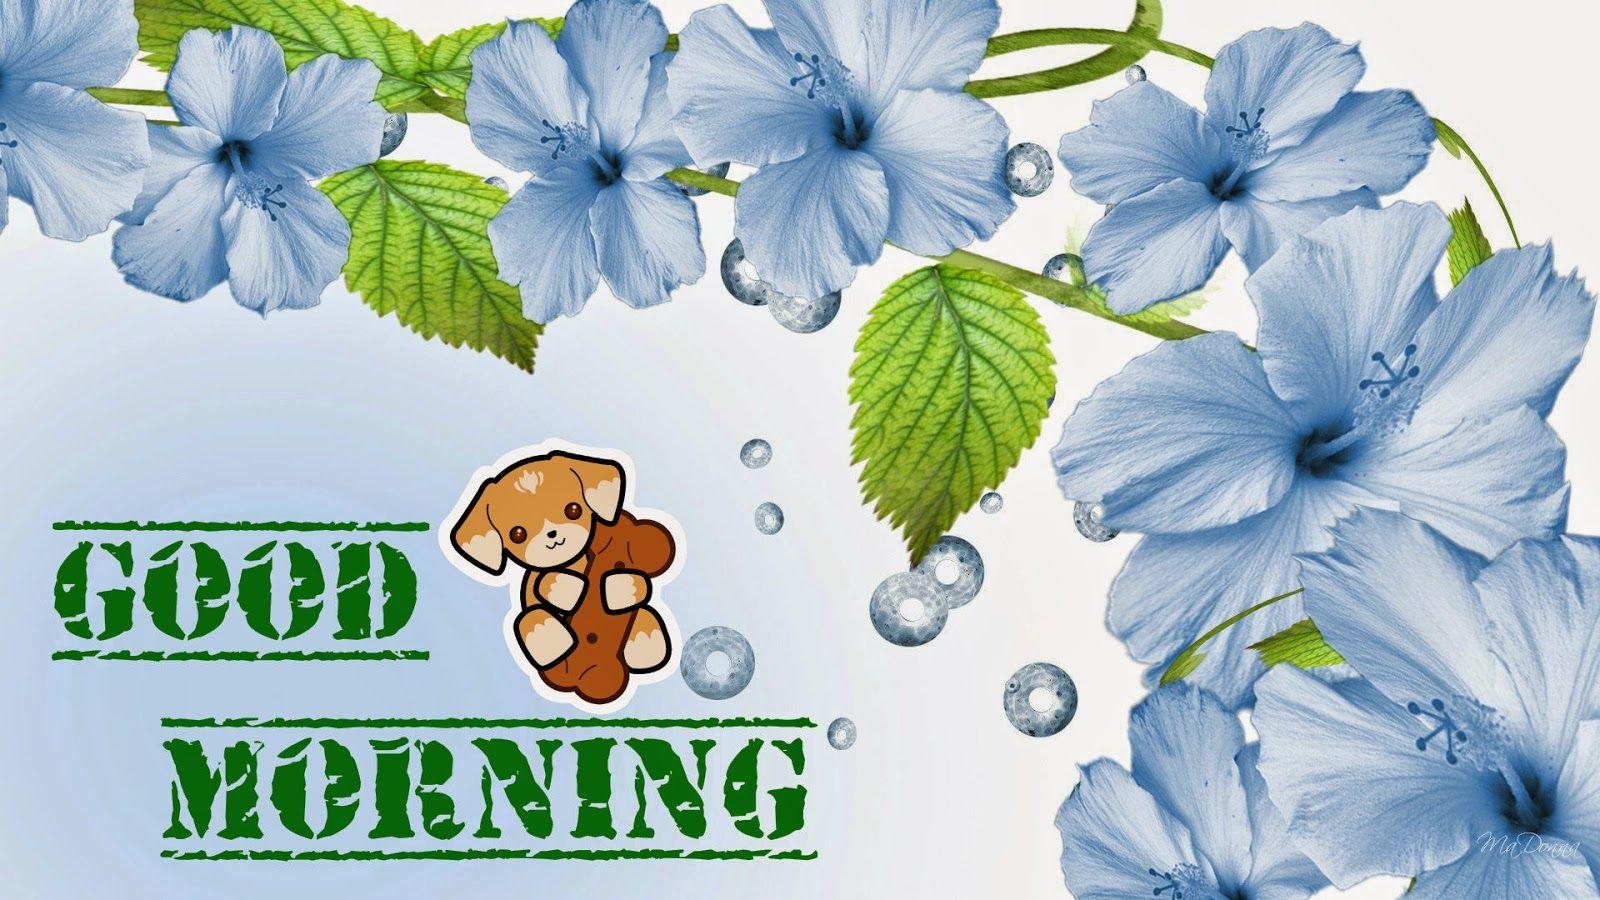 Widescreen Good Morning Image Greetings Cover Photo For Facebook